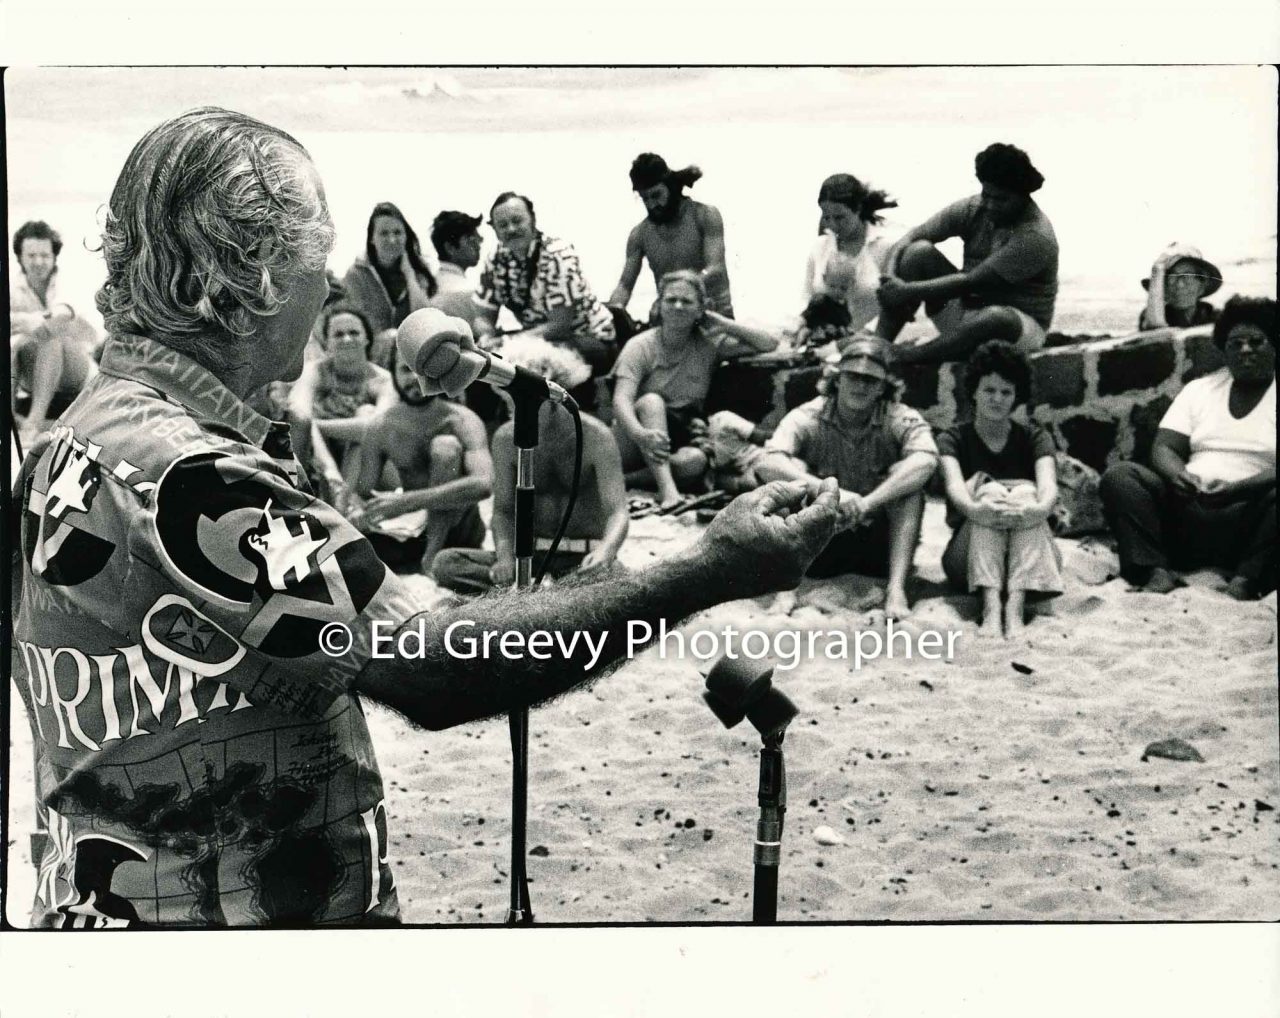 Kalama Valley pig farmer, George Santos, testifies at Save Our Surf protest of proposed major urban development at Wawamalu (Sandy Beach).  (23 April 1972) Negative: 2560-3-21 | Ed Greevy Photographer